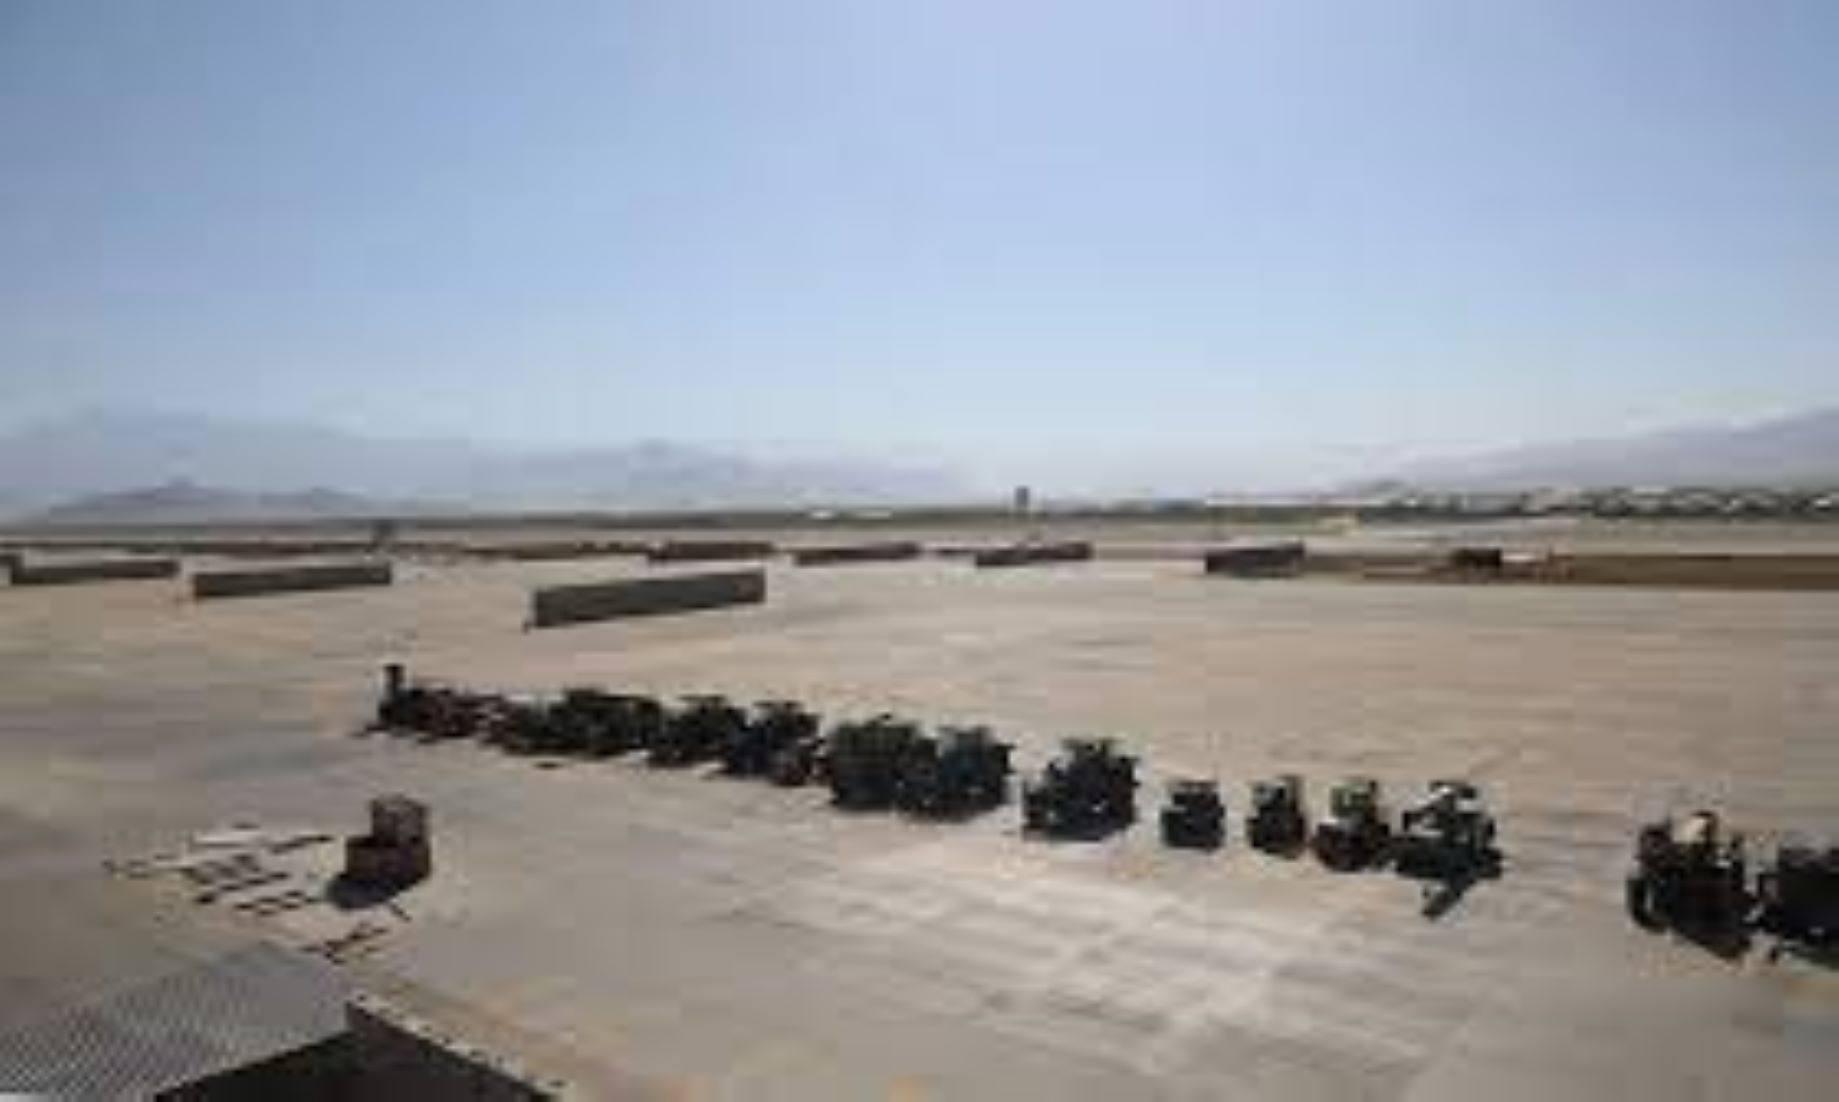 Afghan Gov’t To Turn Former U.S. Military Bases Into Economic Zones